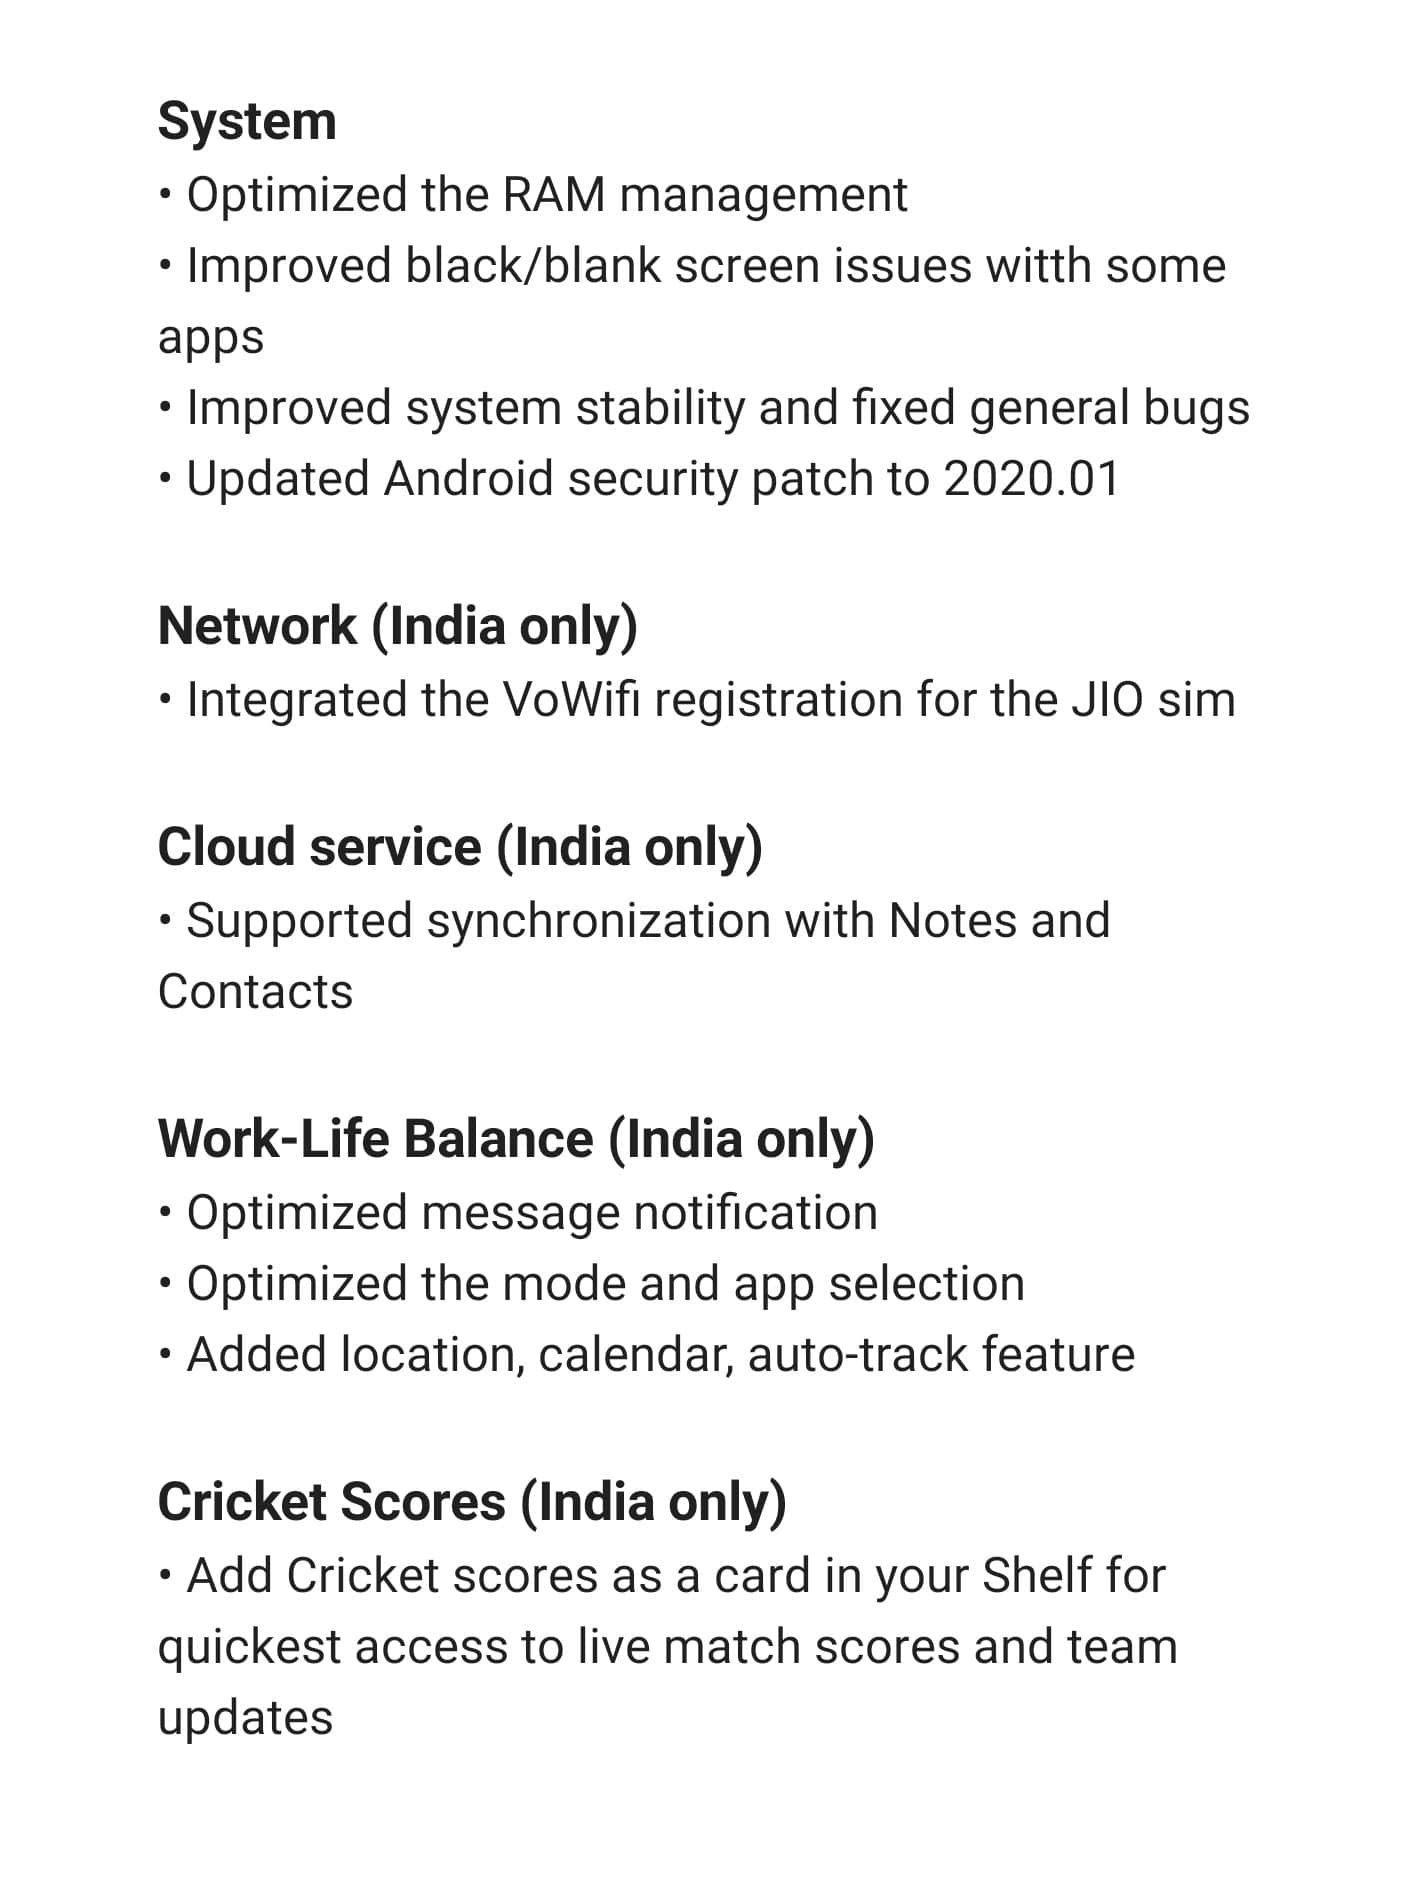 Oxygen OS 10.3.1 Stable Ota for Oneplus 7 Pro